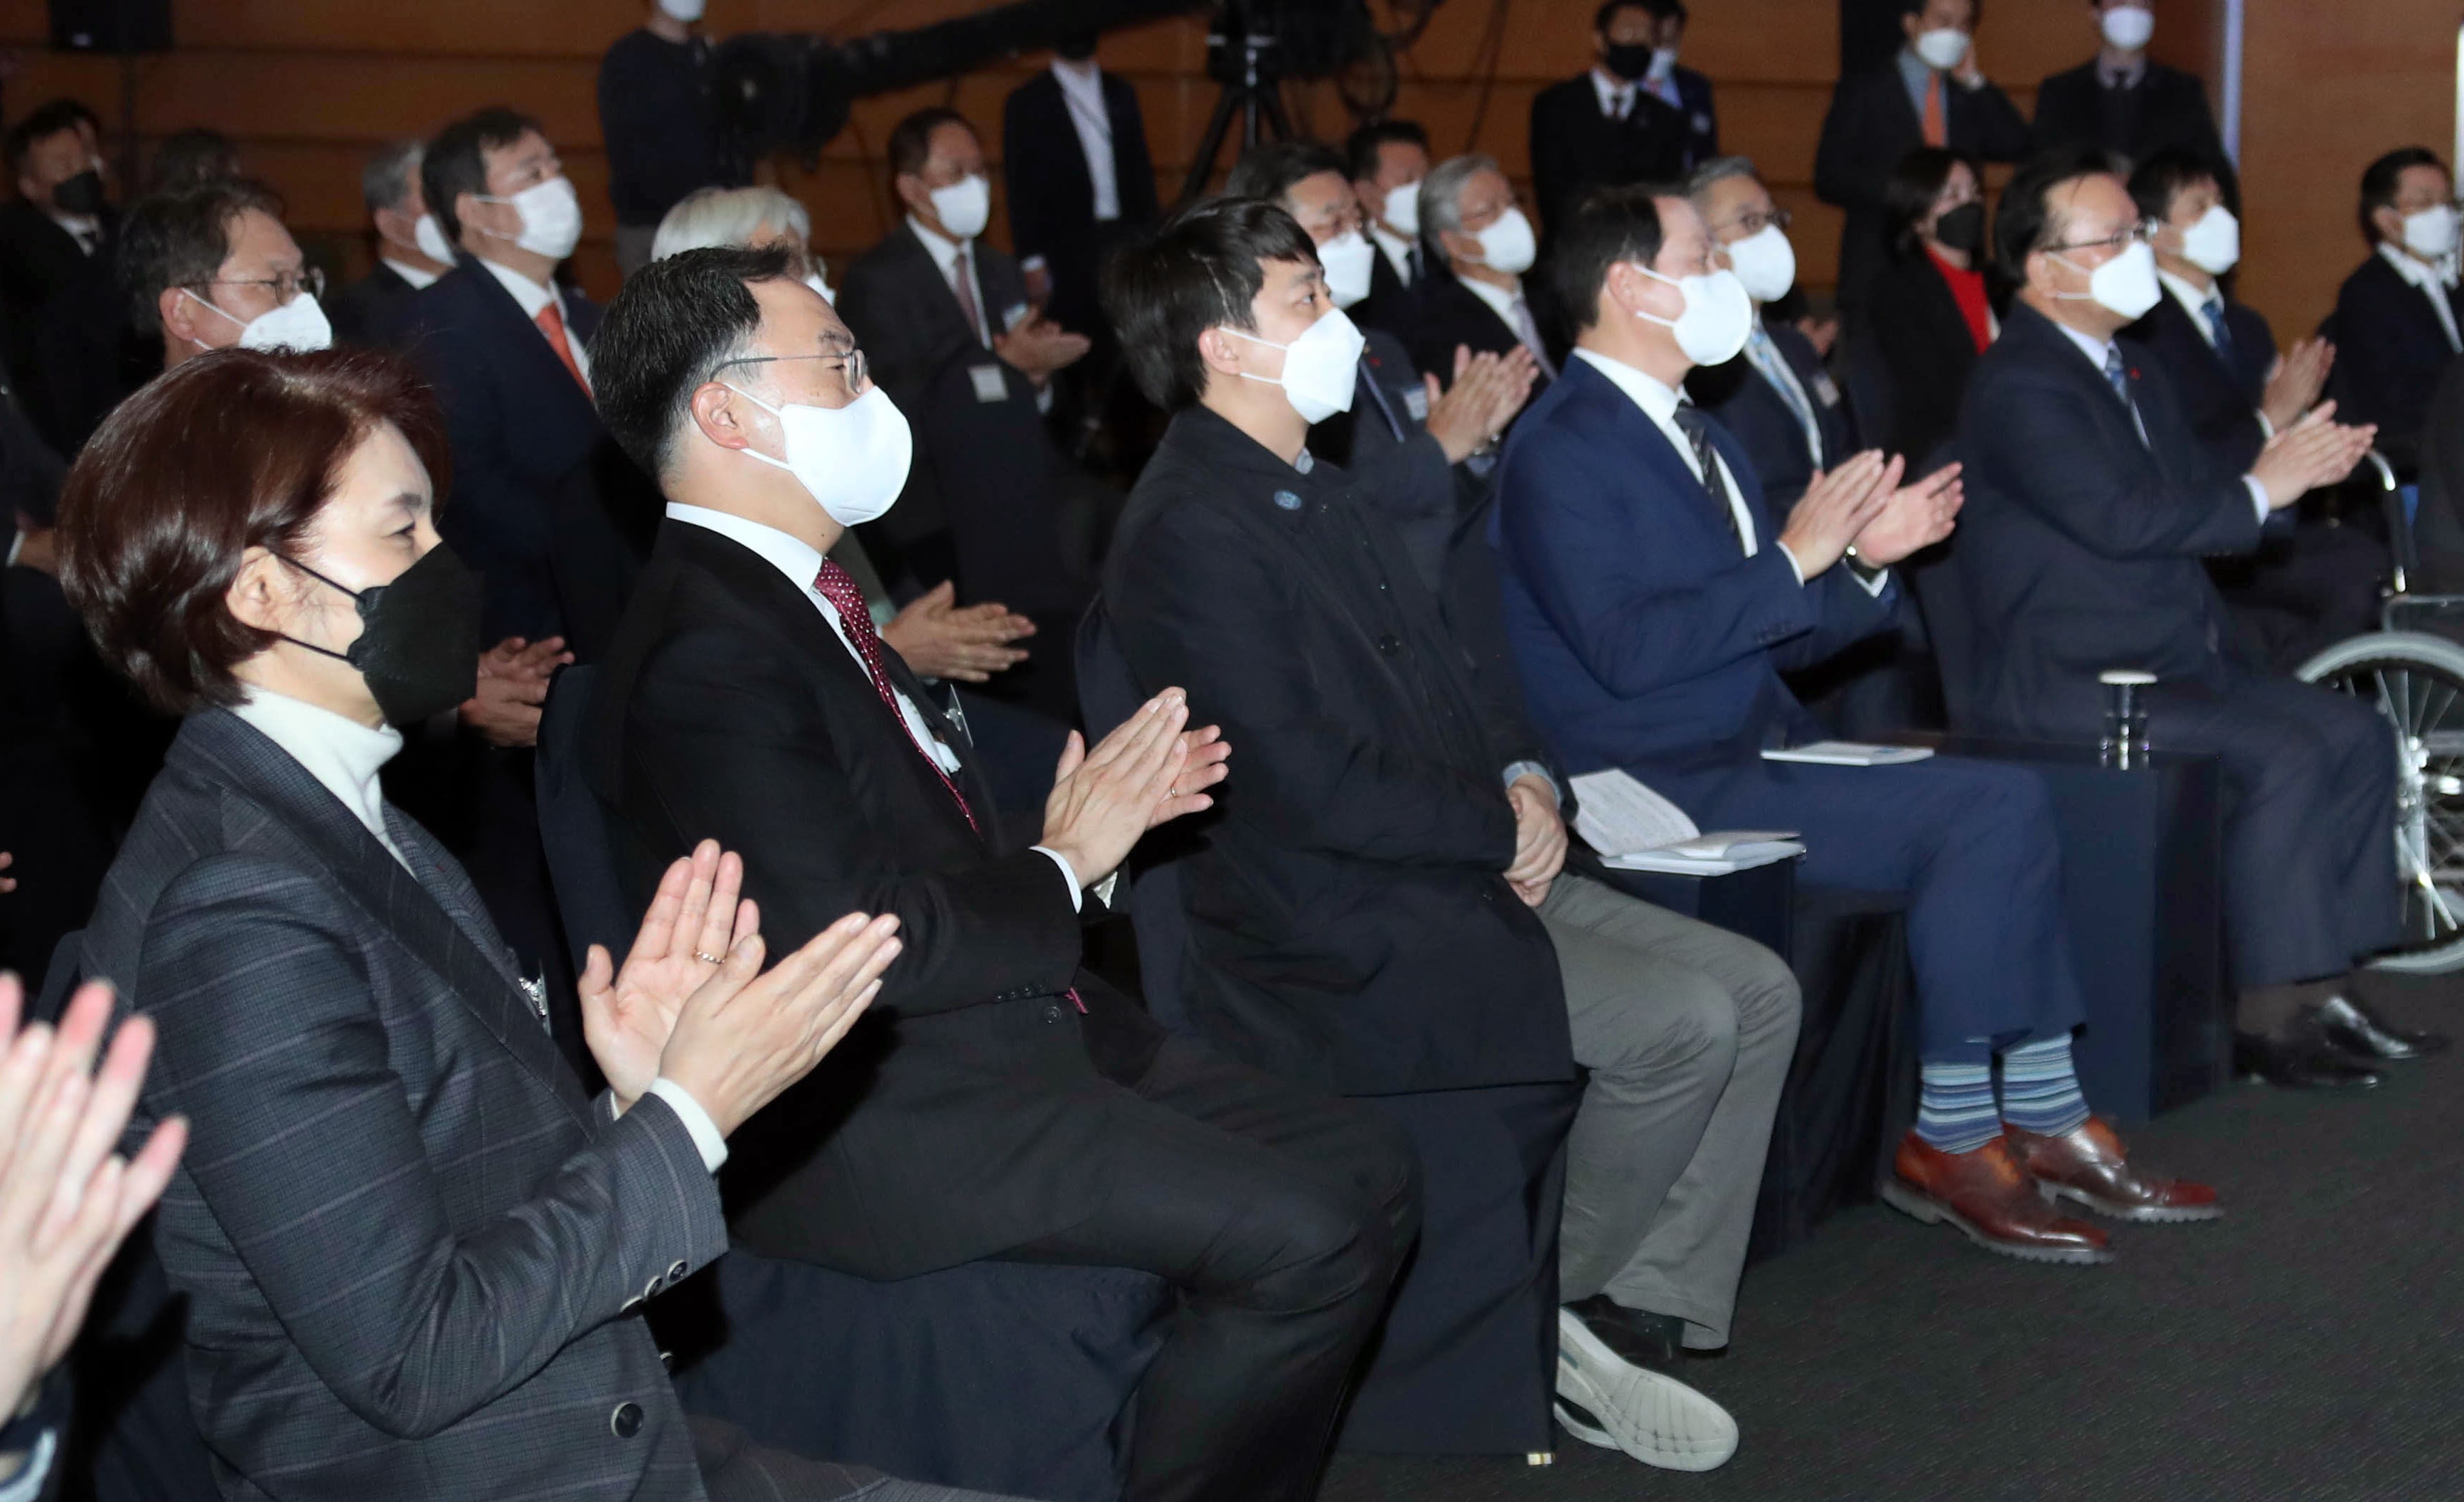 Minister Moon attends 2022 Business Leaders’ New Year’s Greetings